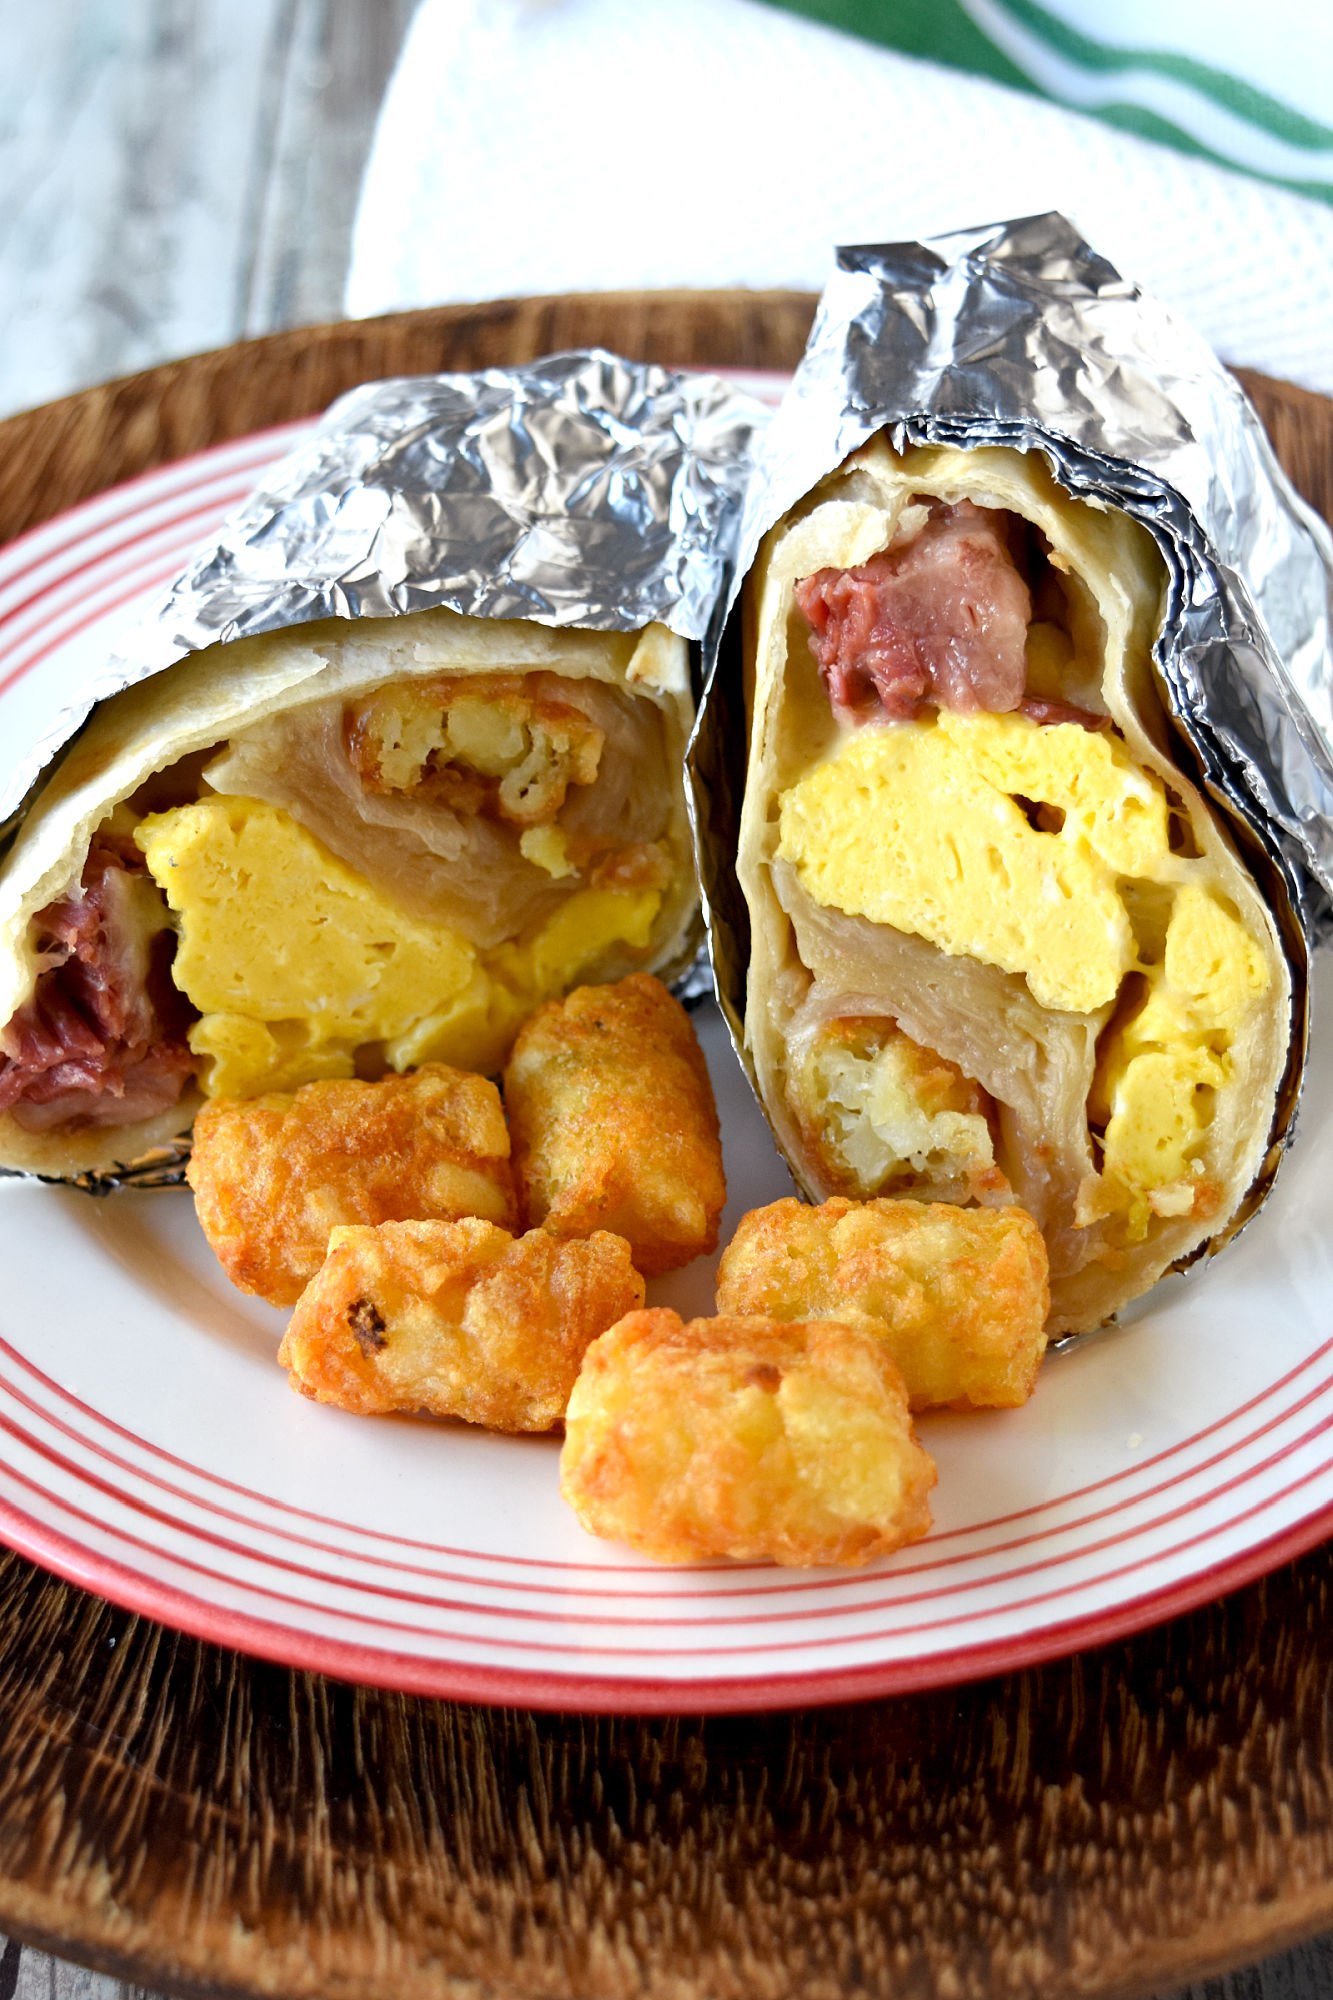 Easy Freezer Breakfast Burritos whip up in no time, are hearty and filling, and you can easily change up the ingredients to match your taste. They’re a perfect grab and go breakfast for work!  #OurFamilyTable #breakfast #brunch #freezermeal #freezerburrito